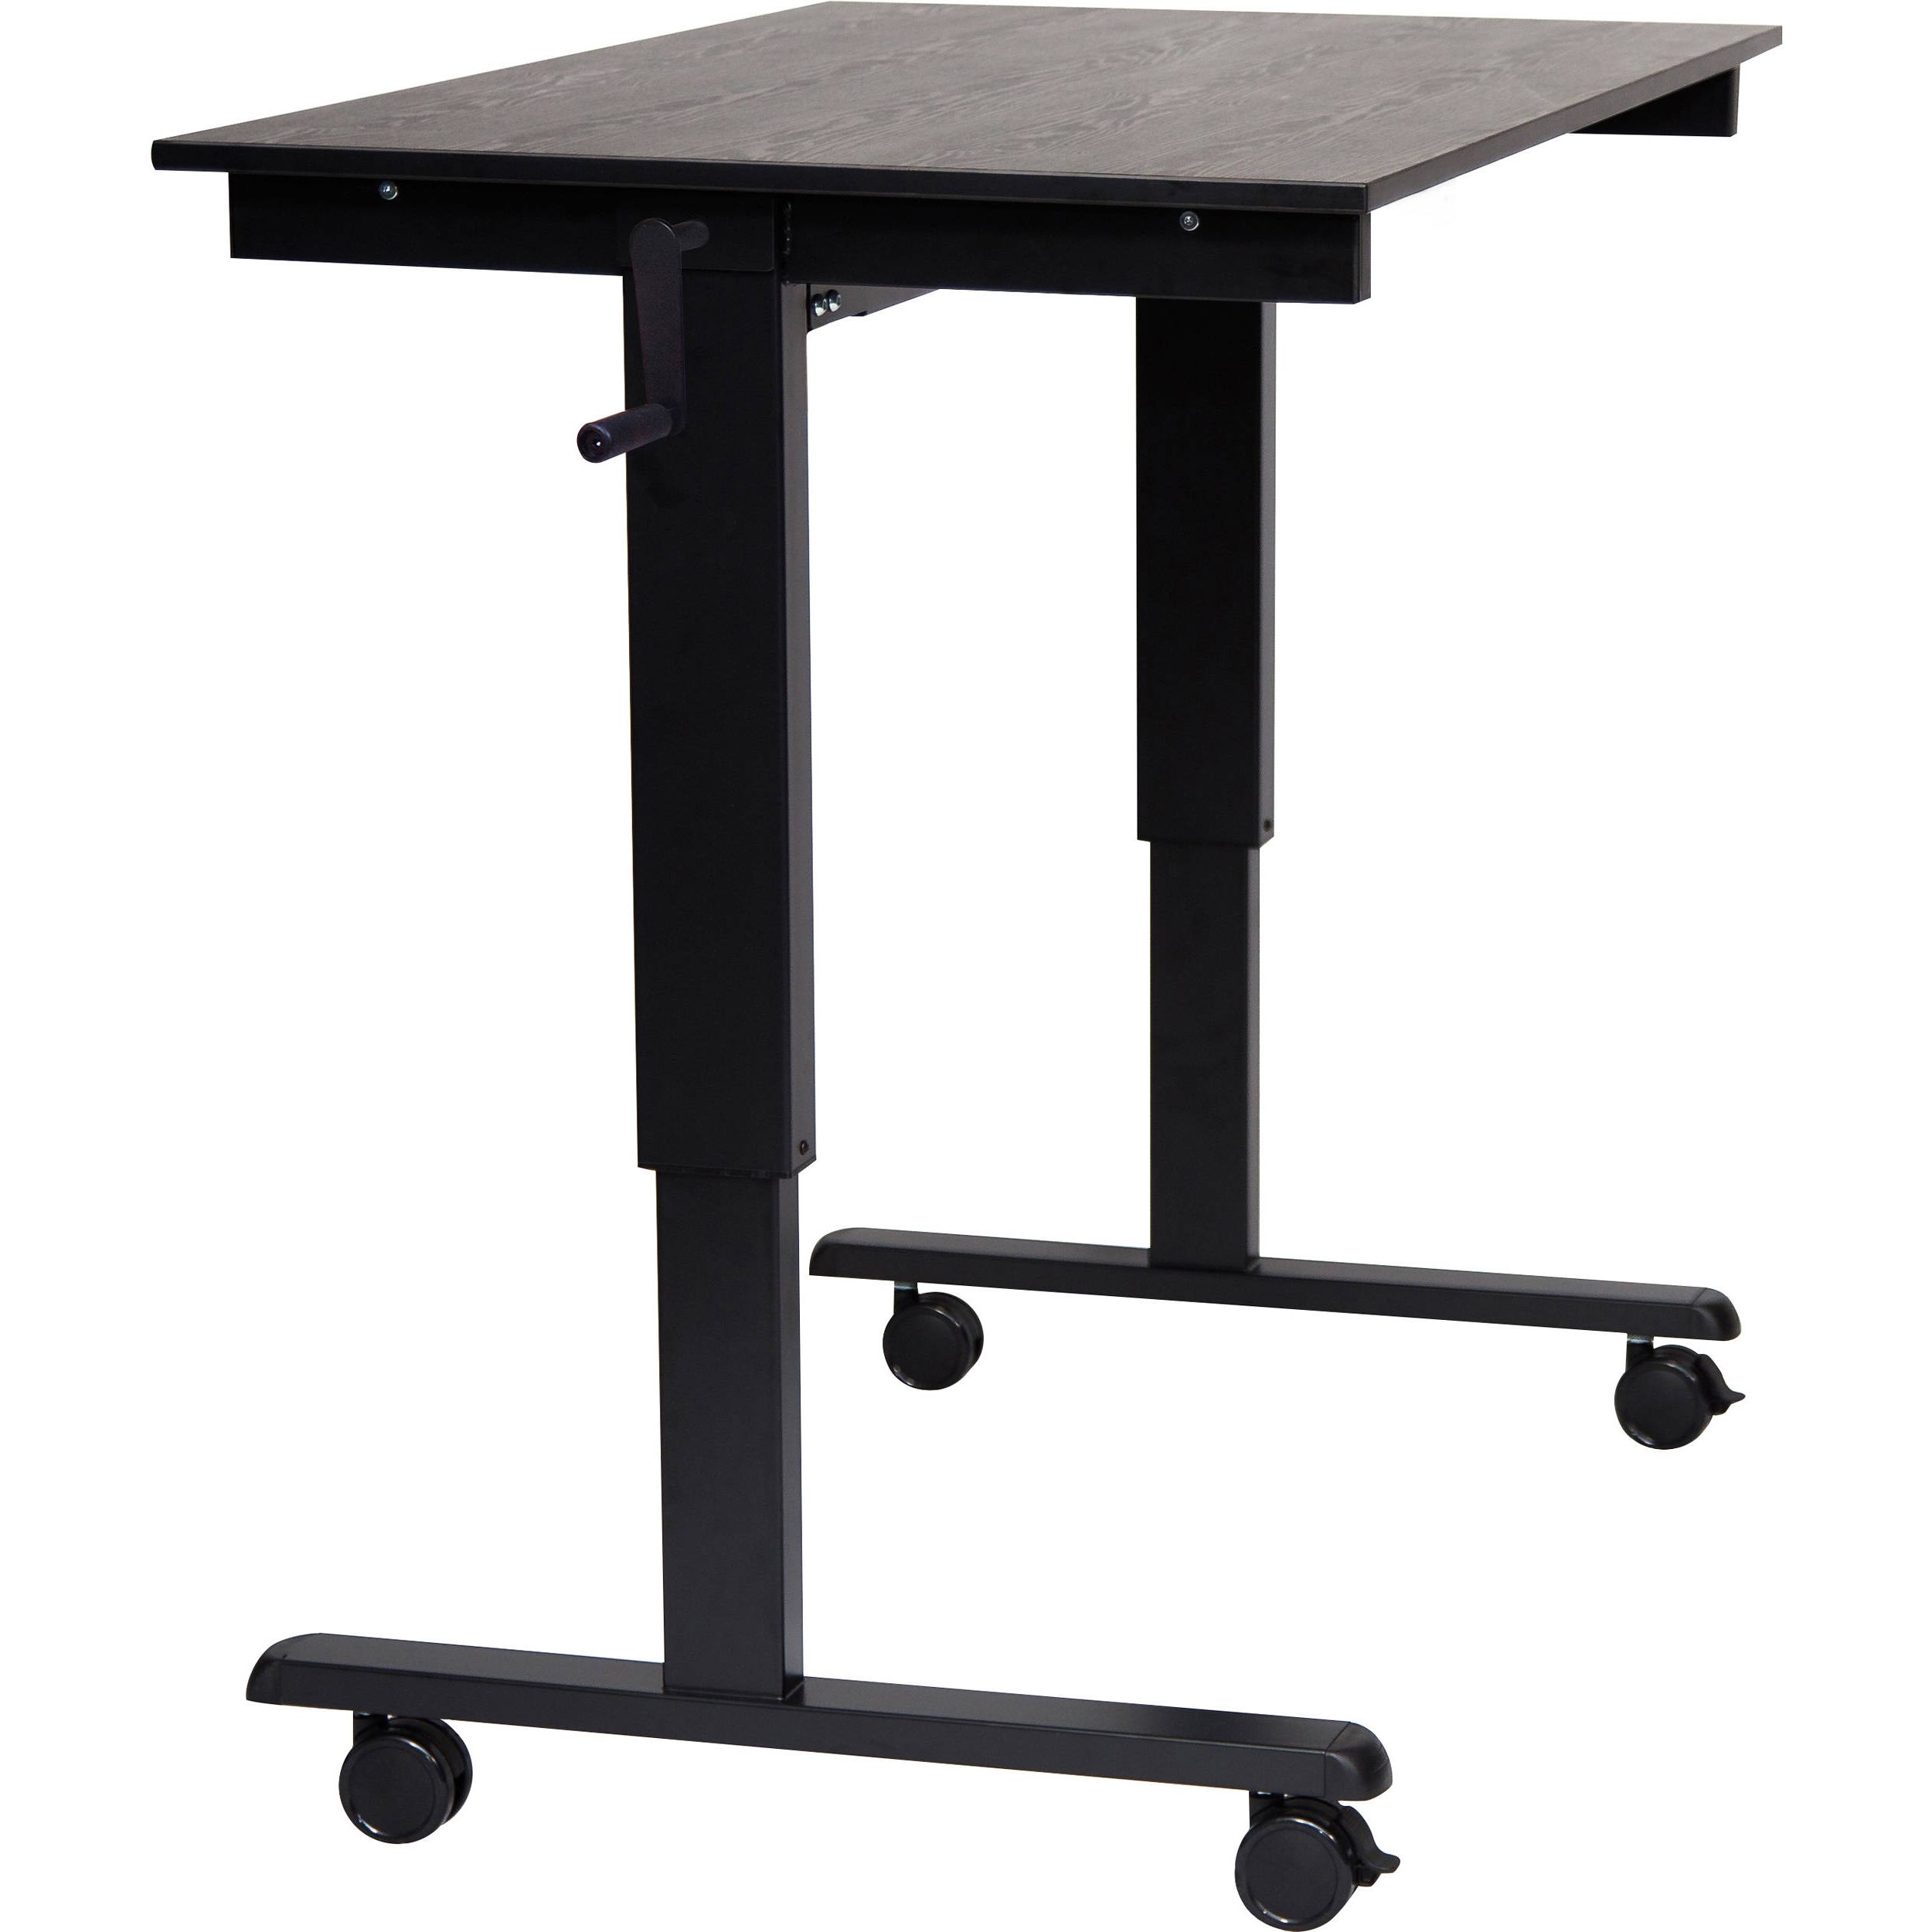 Cherry Adjustable Stand Up Desks Intended For Popular Luxor 48" Crank Adjustable Stand Up Desk Standcf48 Bk/bo B&h (View 11 of 15)